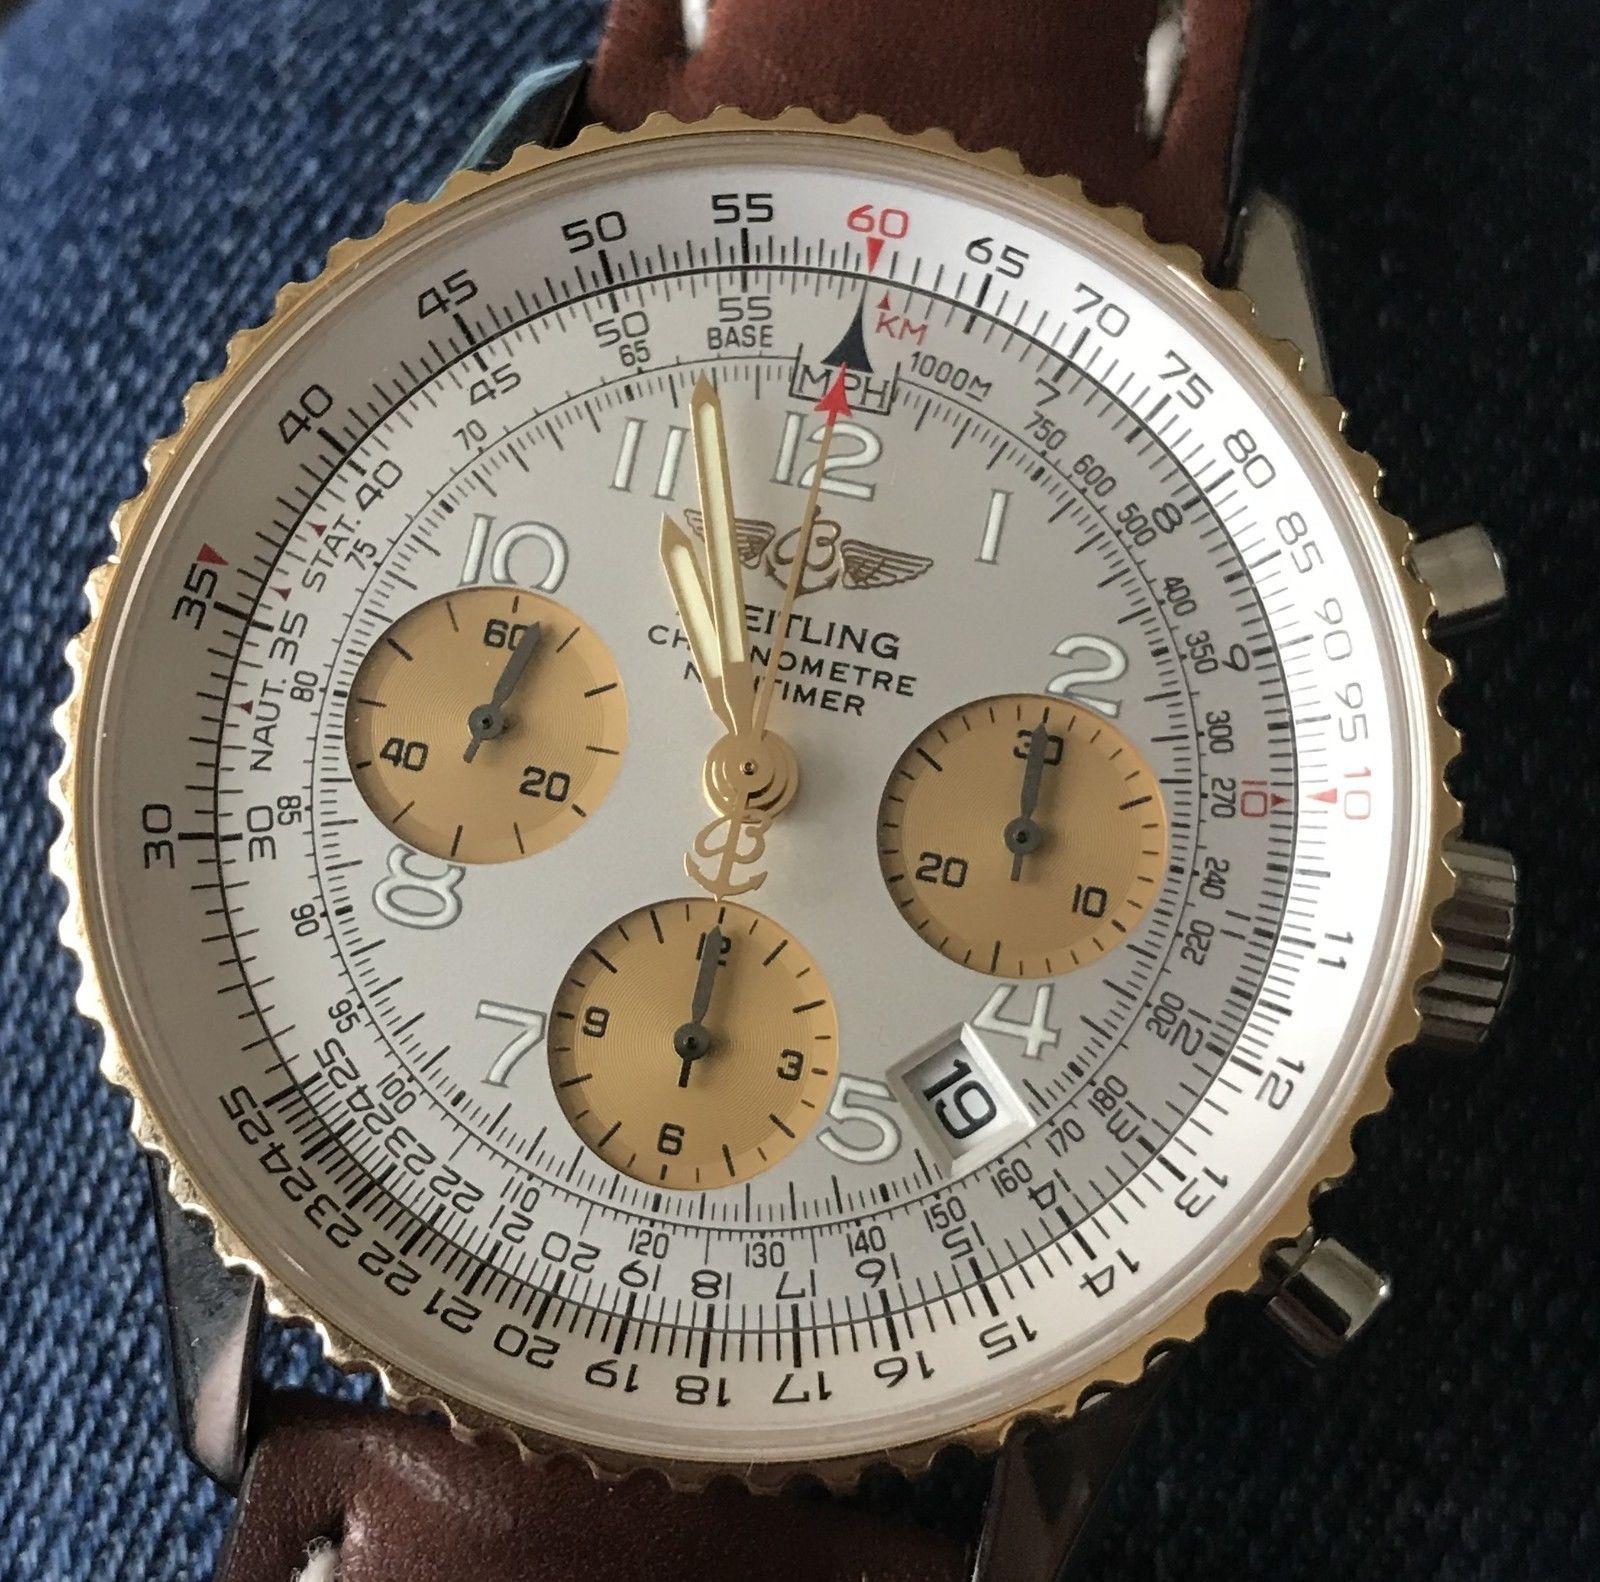 18Ct Gold and Steel Breitling Navitimer D23322 Wristwatch, Full Set Box Papers 1